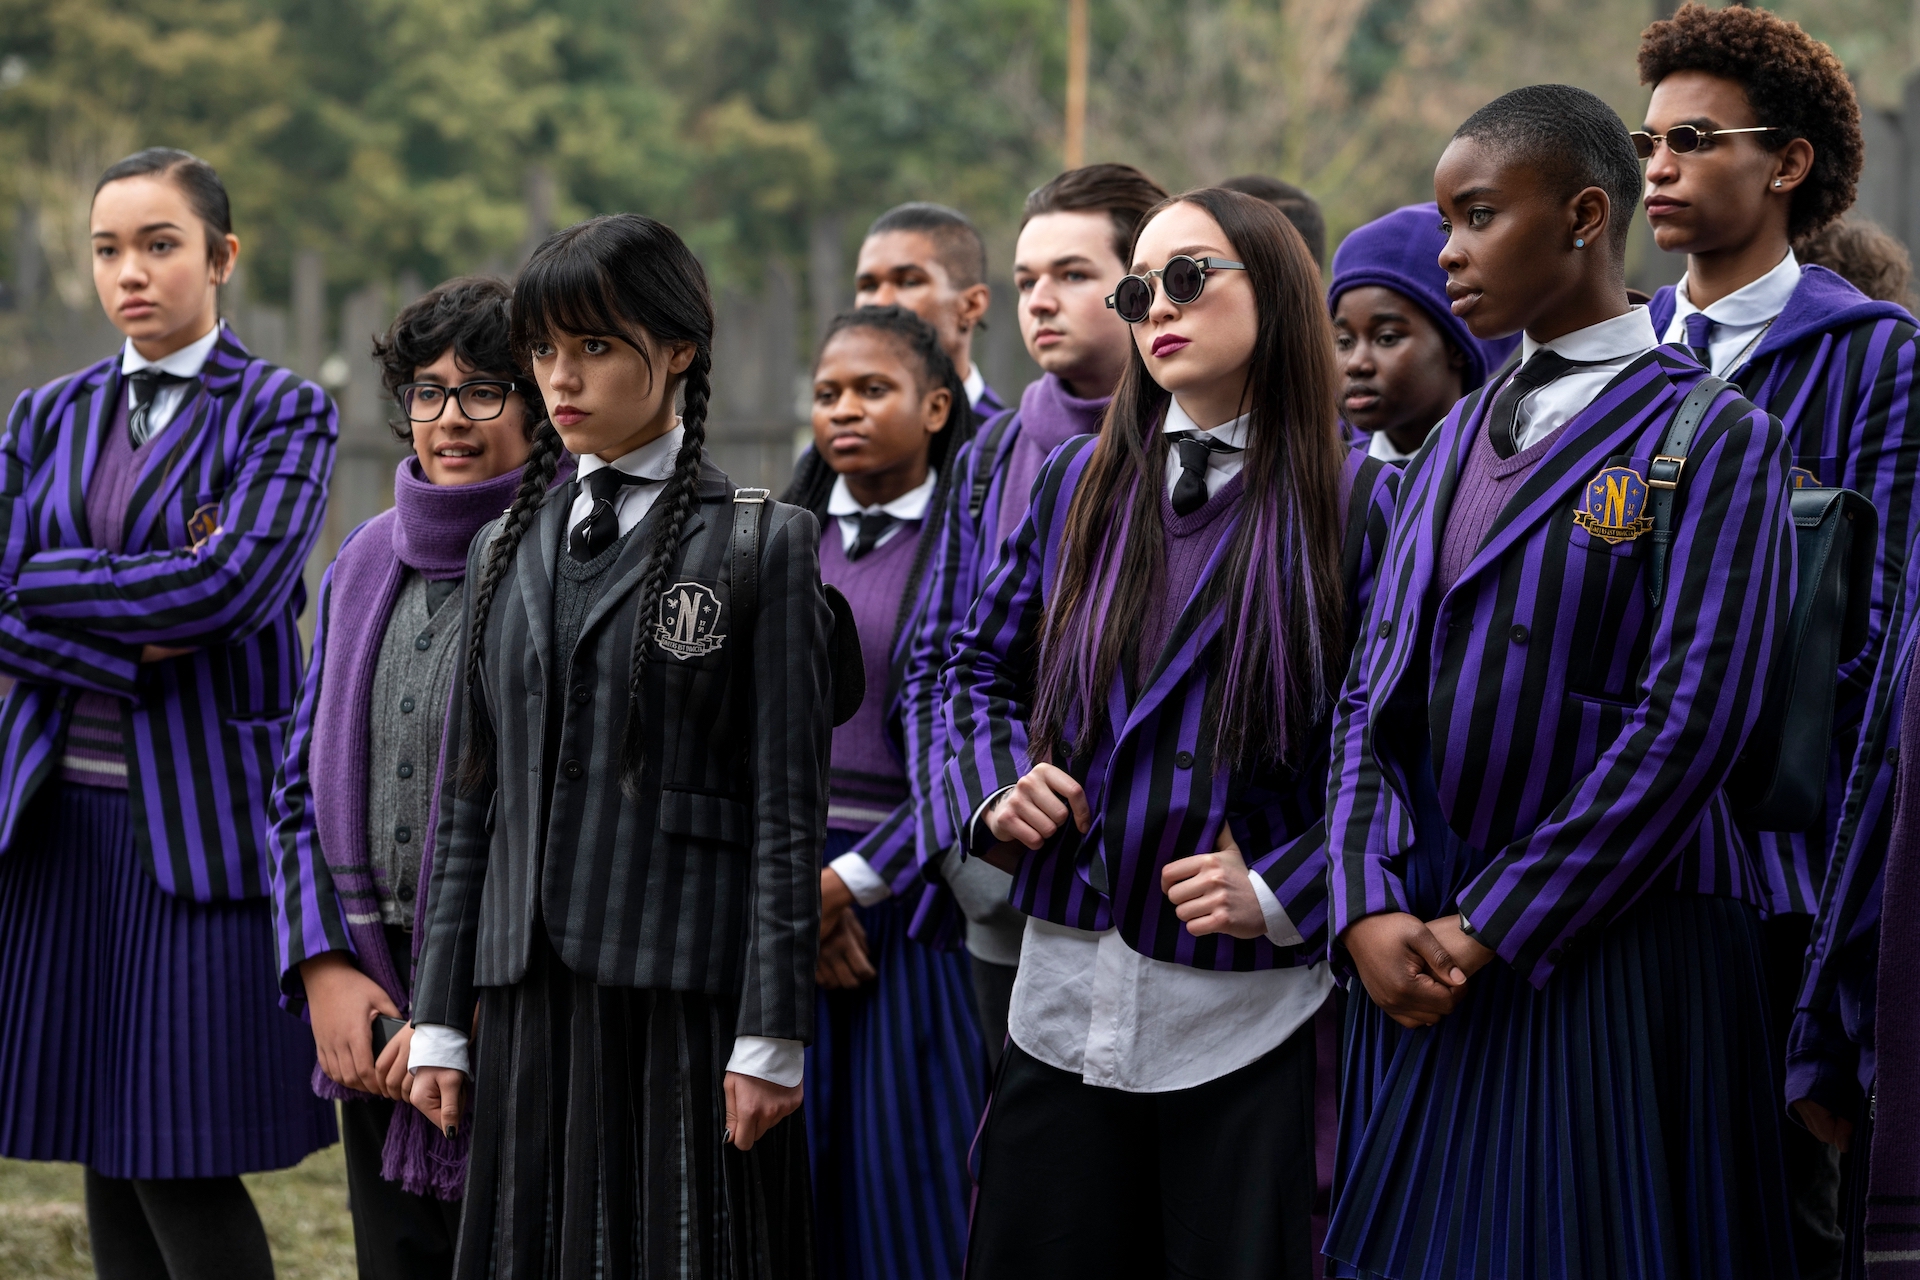 'Wednesday' is the new series that has hit Netflix. The comedy series focuses on Gomez and Morticia's daughter, Wednesday, from the classic hit movie The Addams Family. 